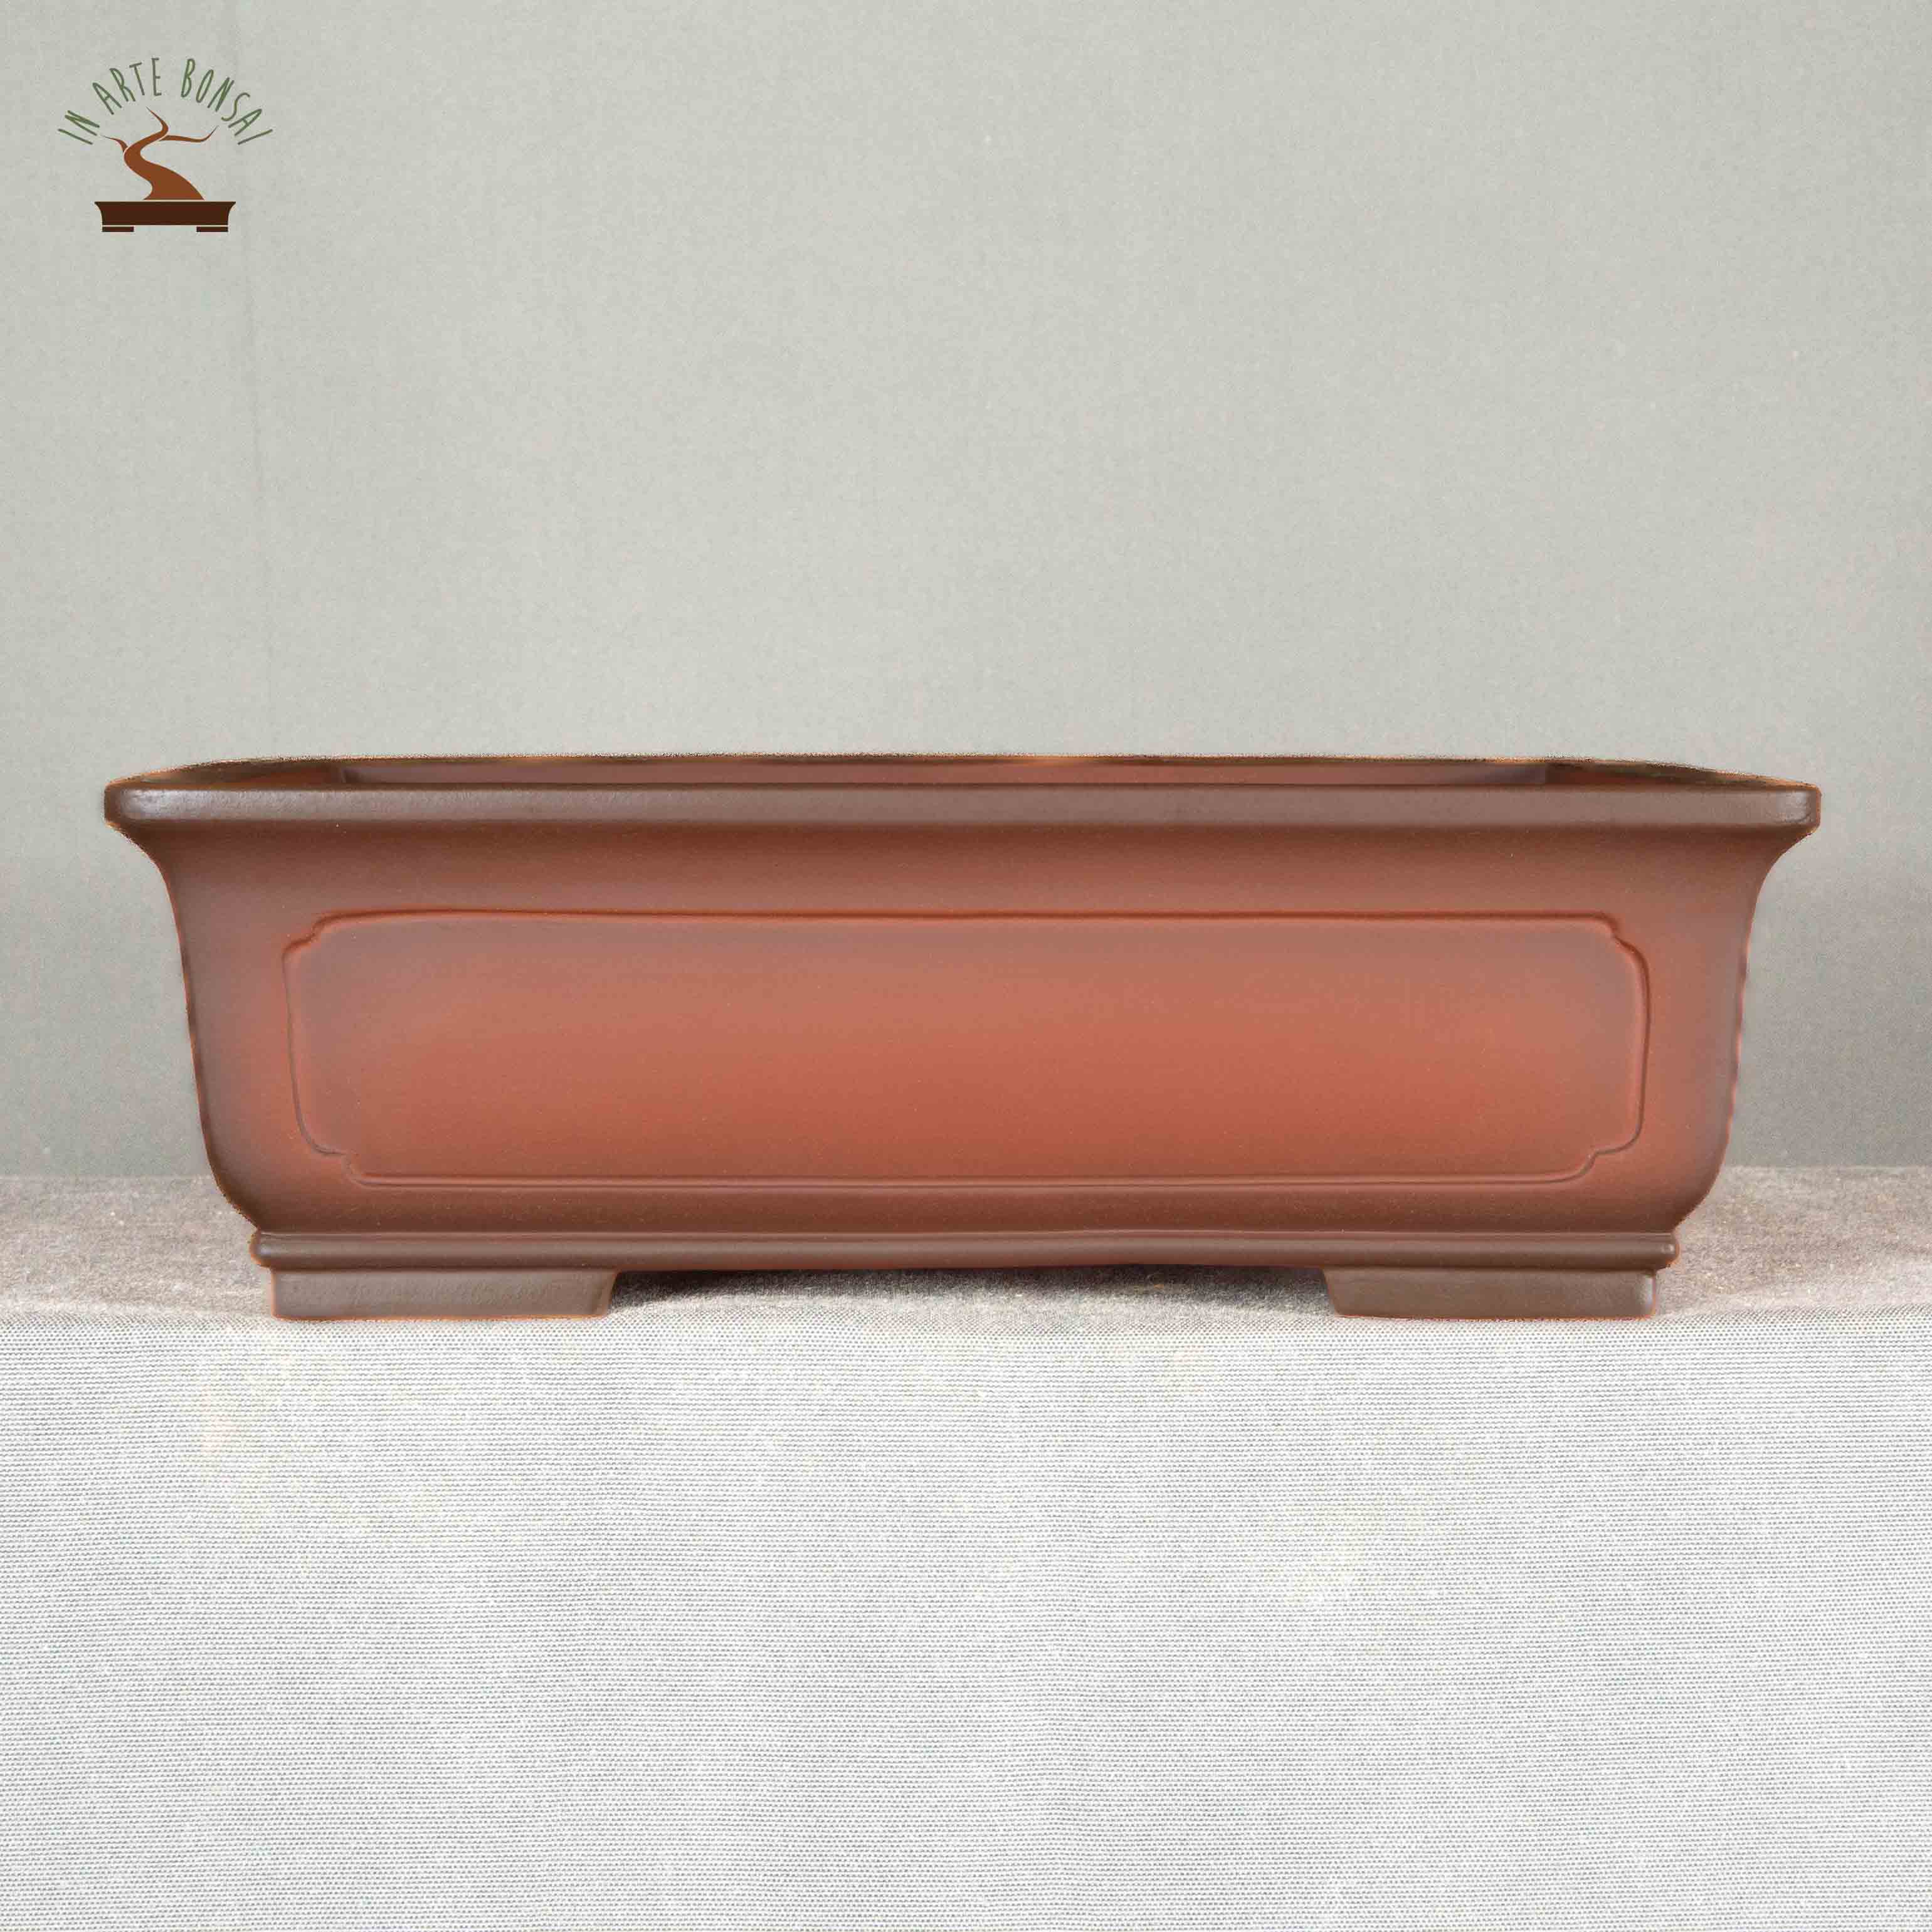 Bonsai pots in many shapes, sizes and colours